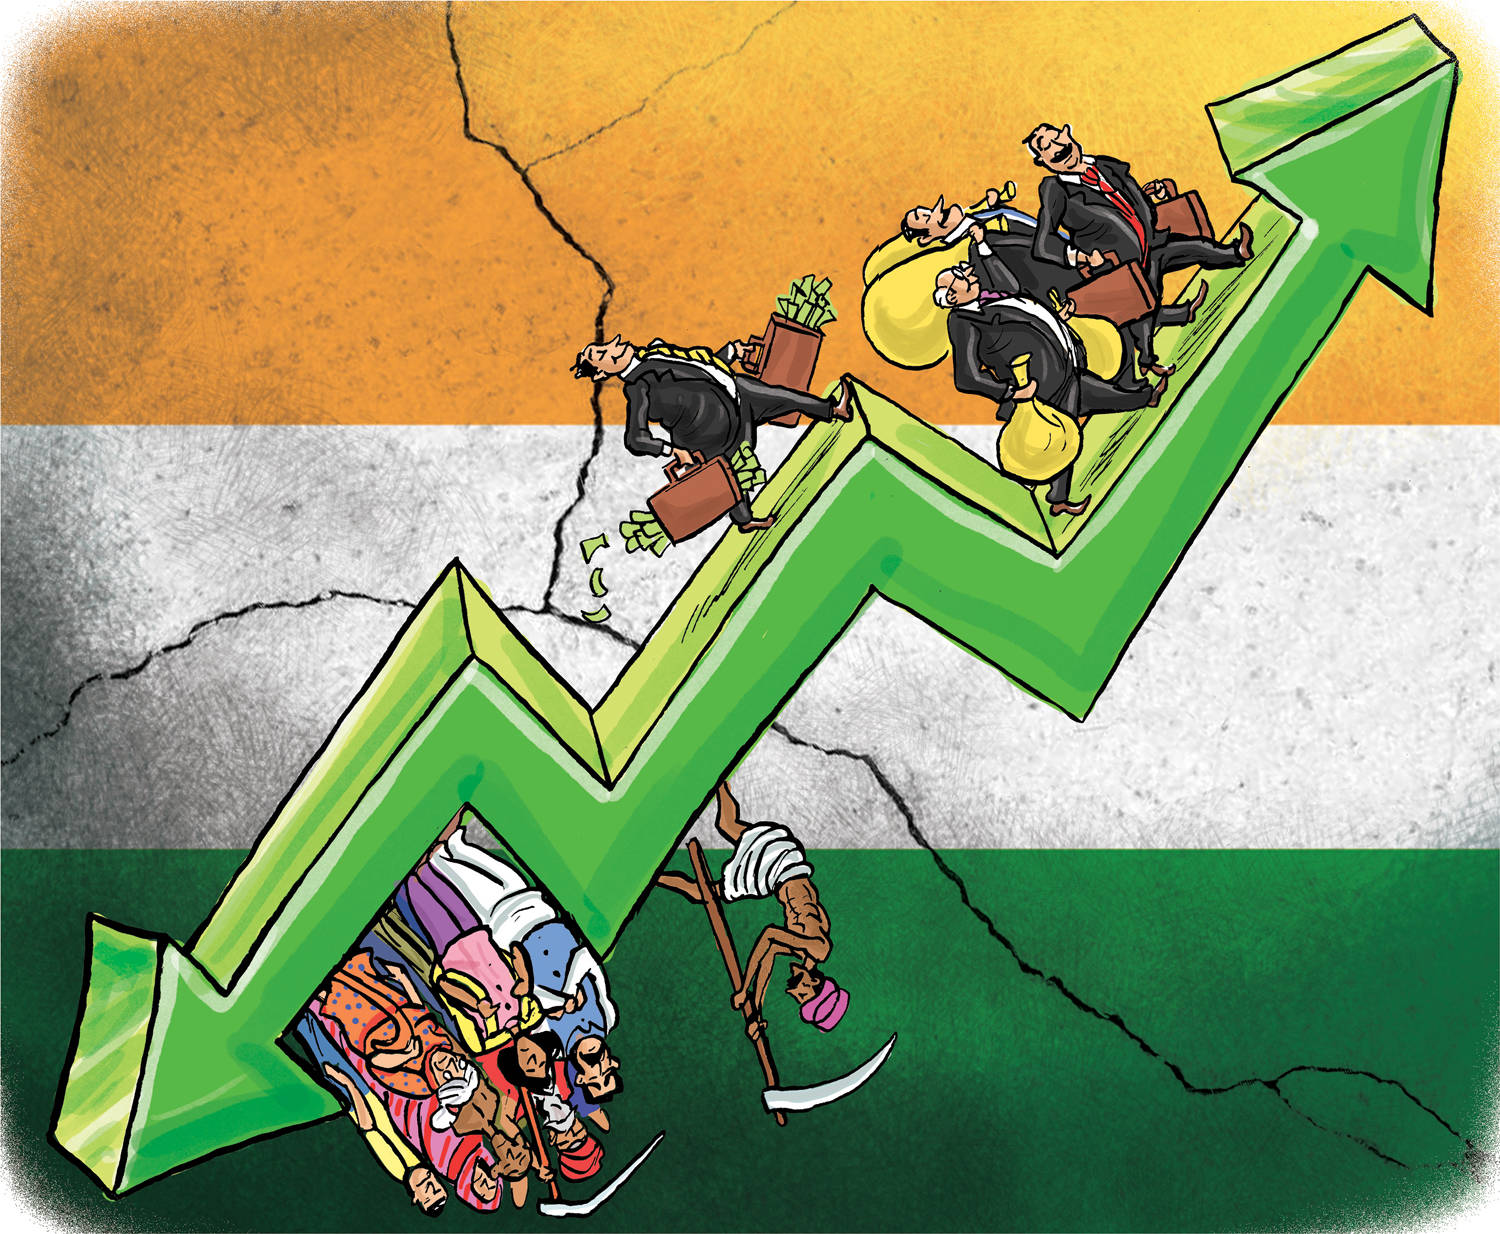 negotiating the future – india's current economic paradox: growth numbers aren't reflected by other indicators